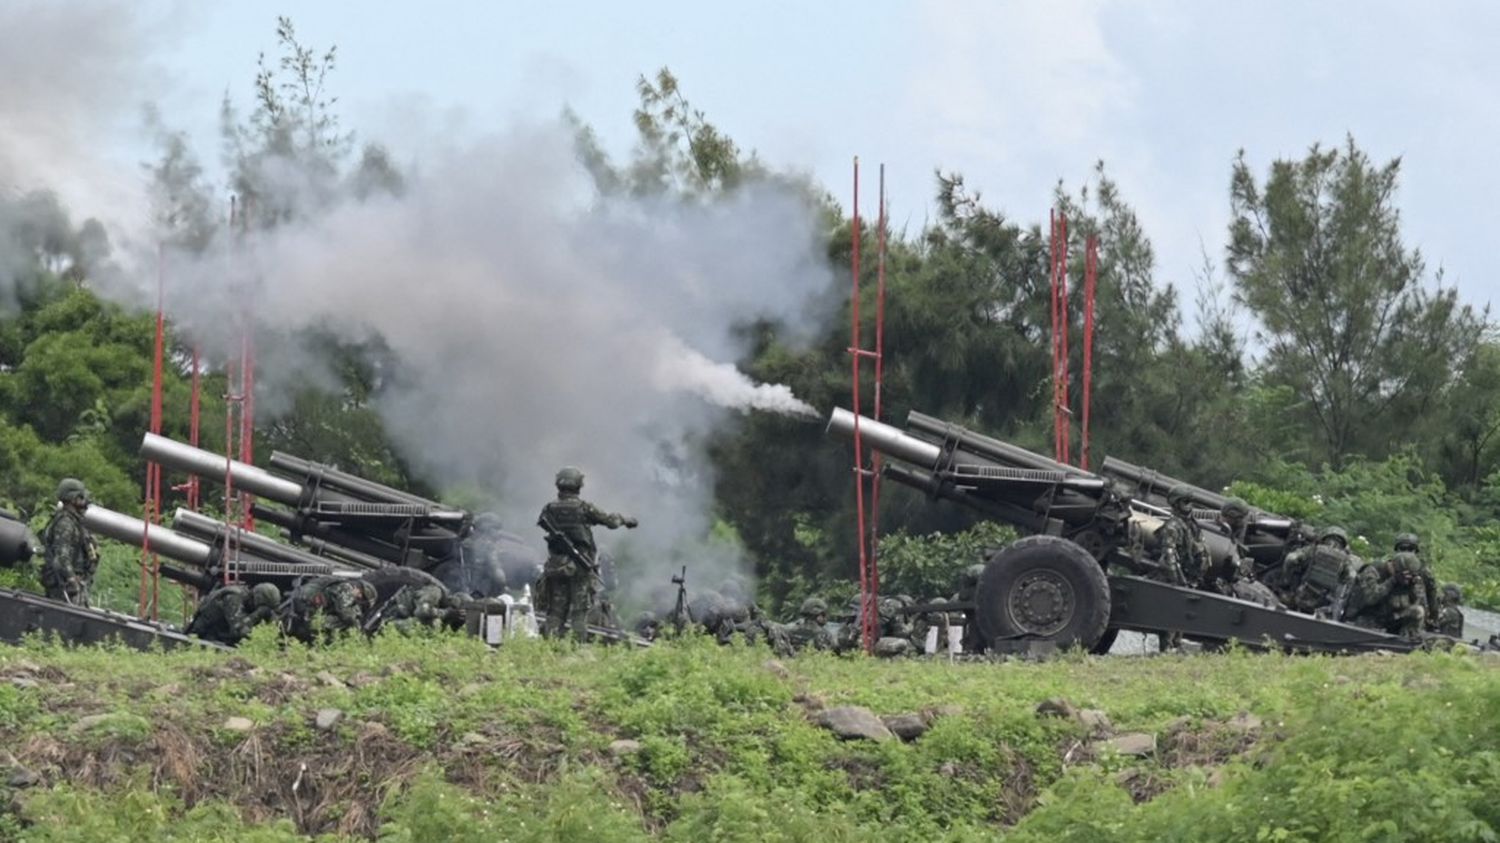 Taiwan organizes military exercises and accuses China of planning an invasion of the island
